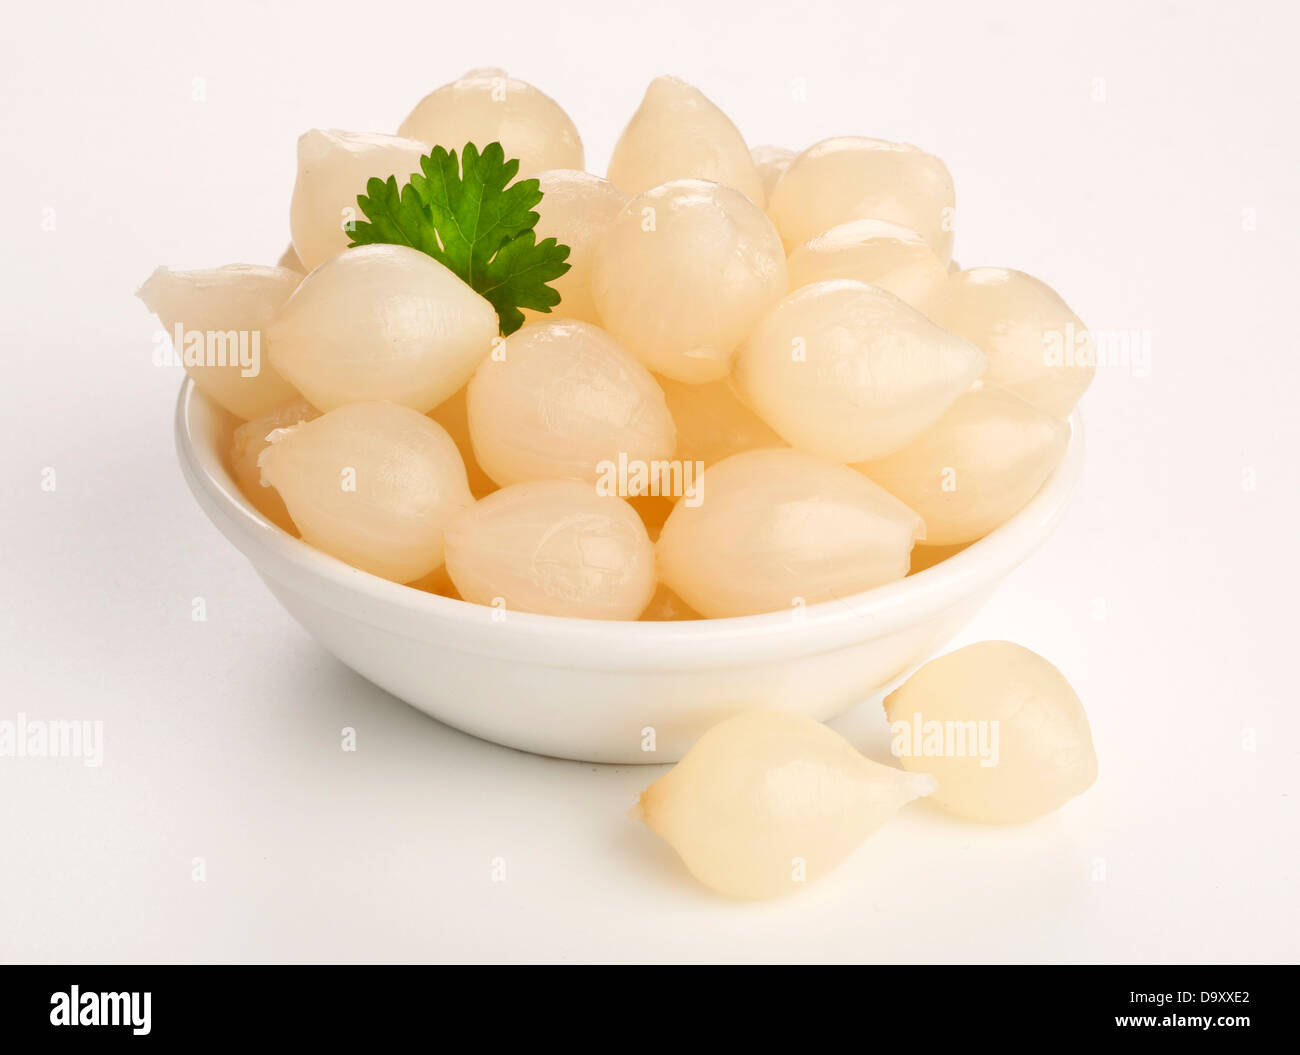 PICKLED SILVERSKIN ONIONS Stock Photo